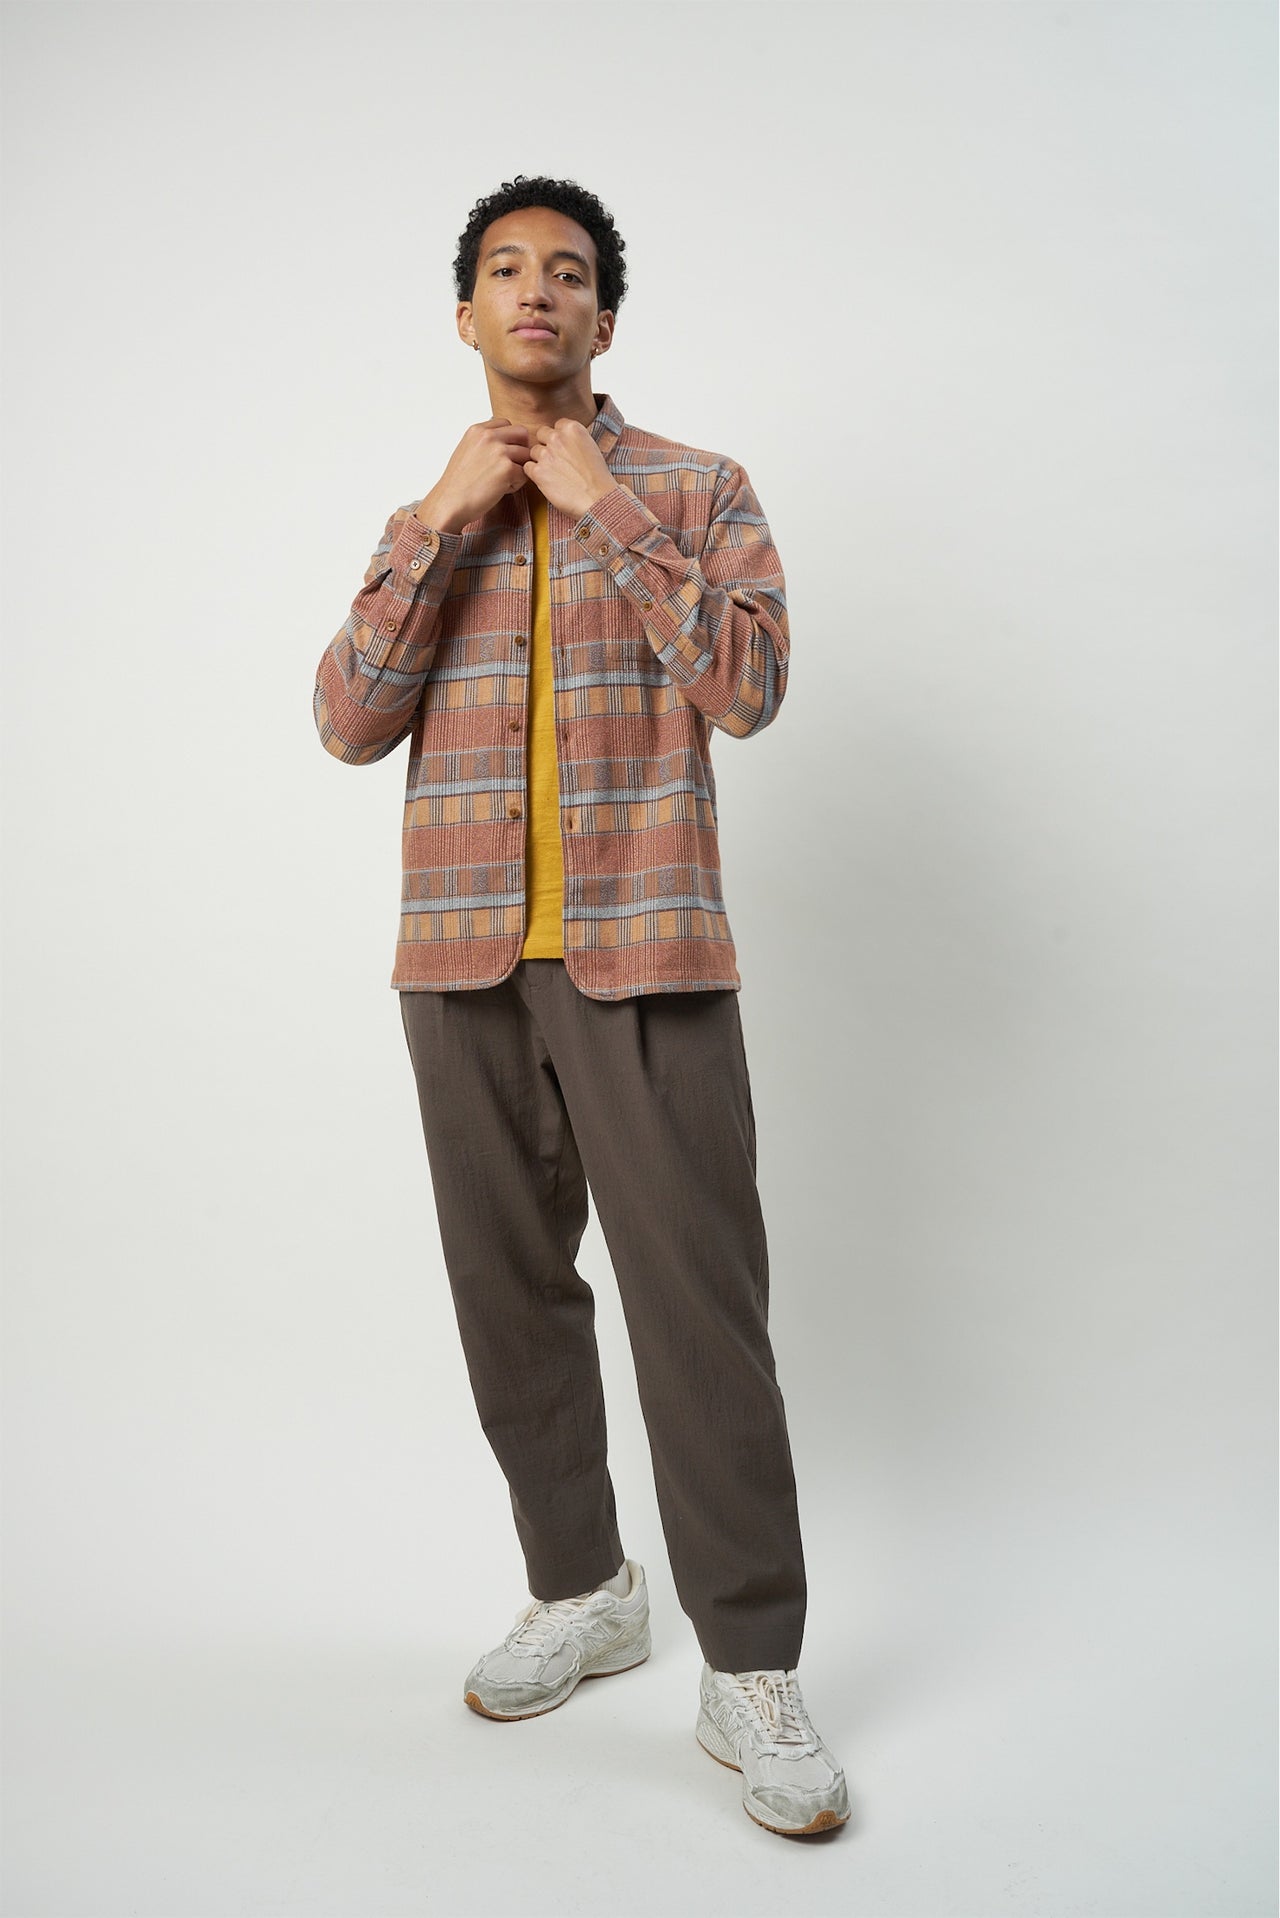 Strong Shirt in a Curry, Cinnamon and Brown Portuguese Cotton Flannel